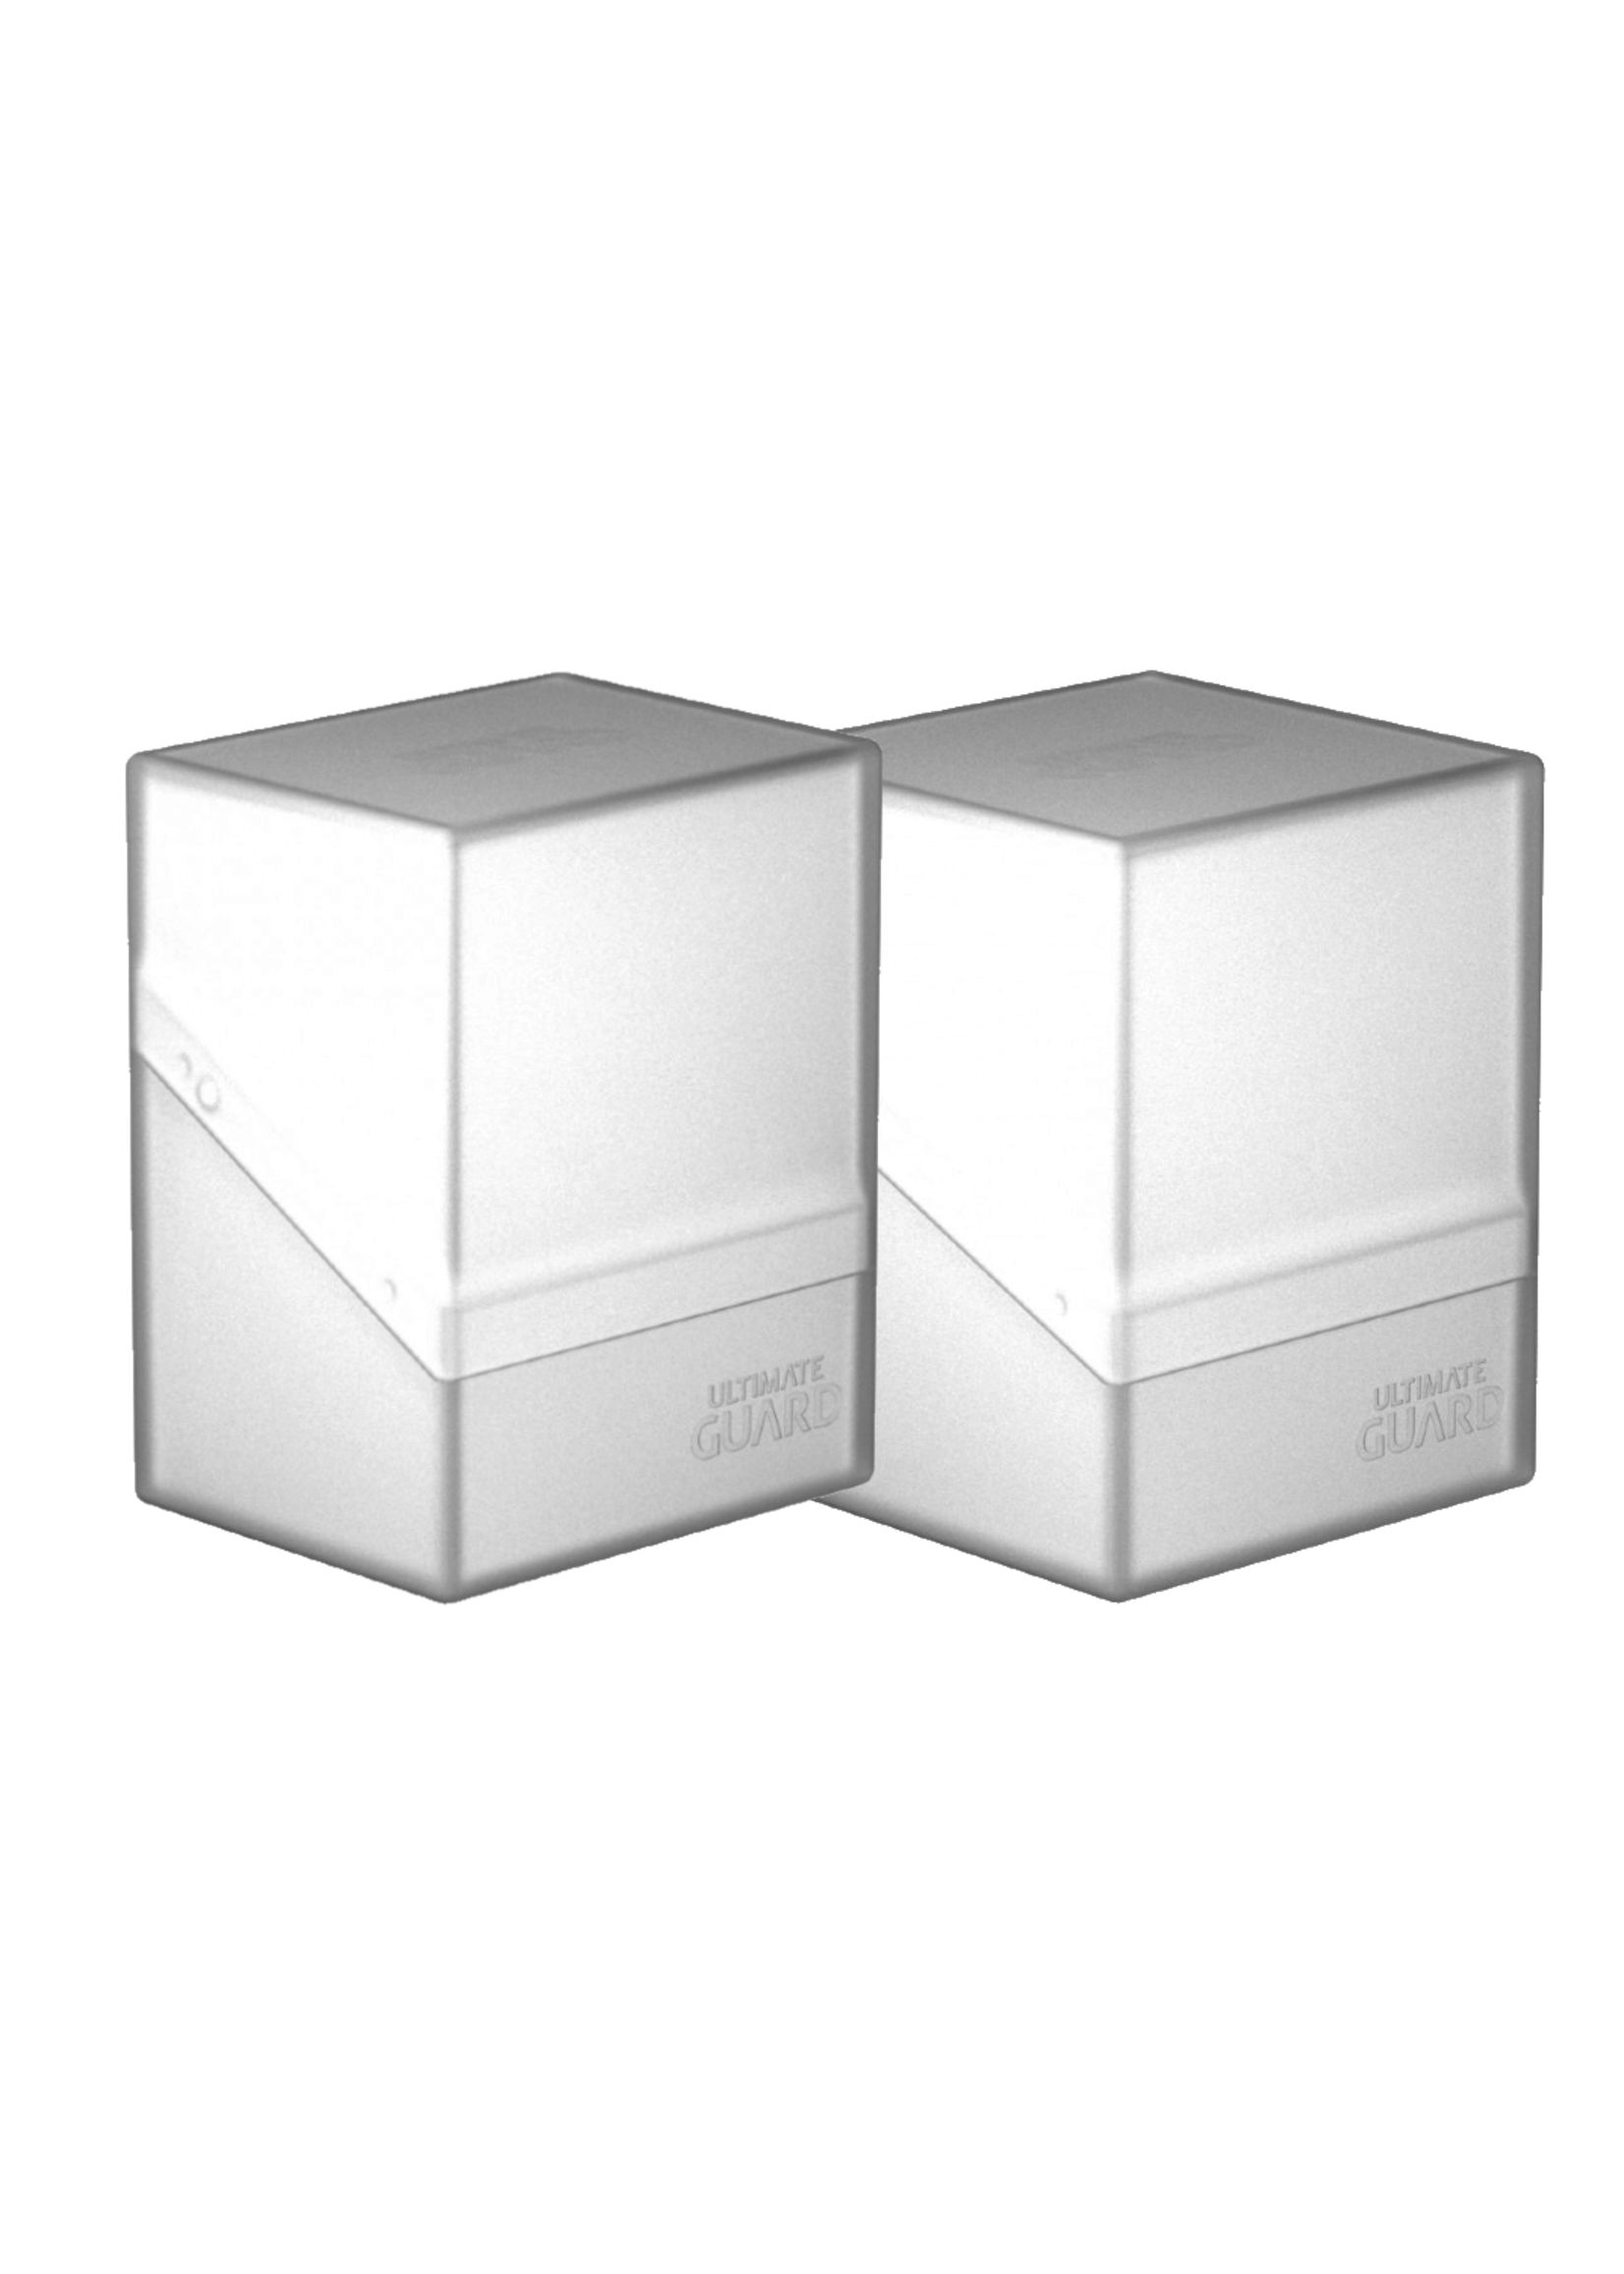 Boulder 100+ Solid Deck Box — Ultimate Guard • Coqui Hobby